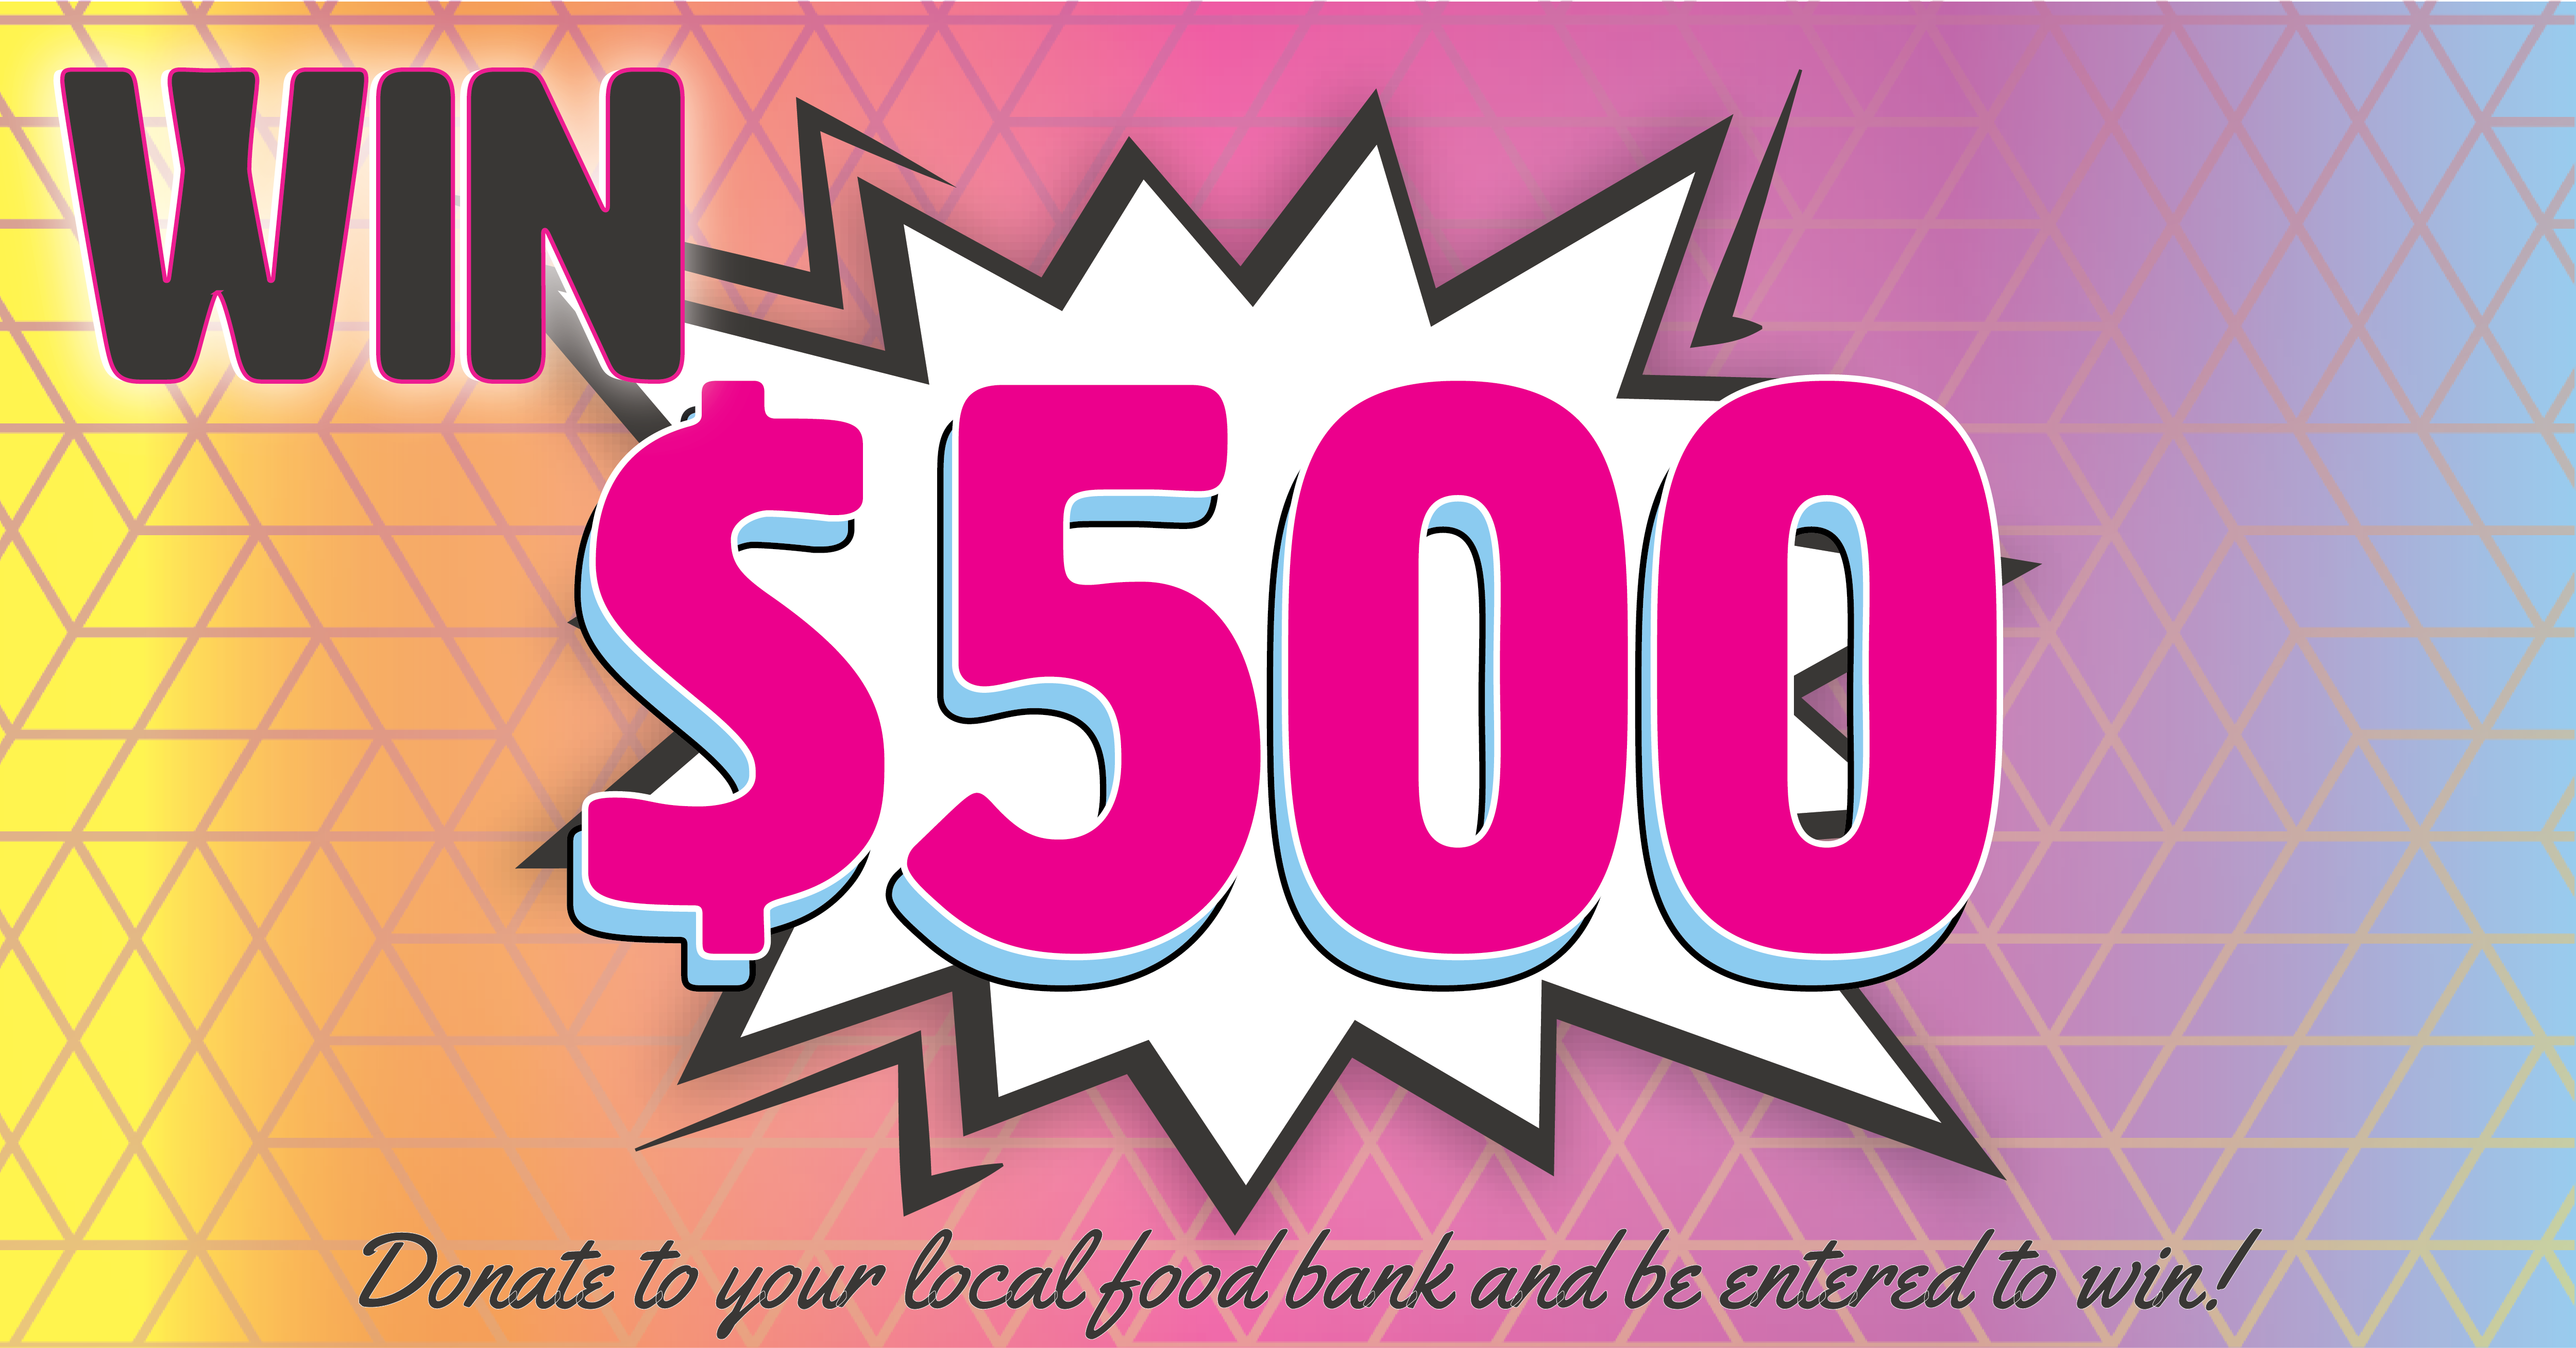 Win $500 by Helping Power Your Pantry